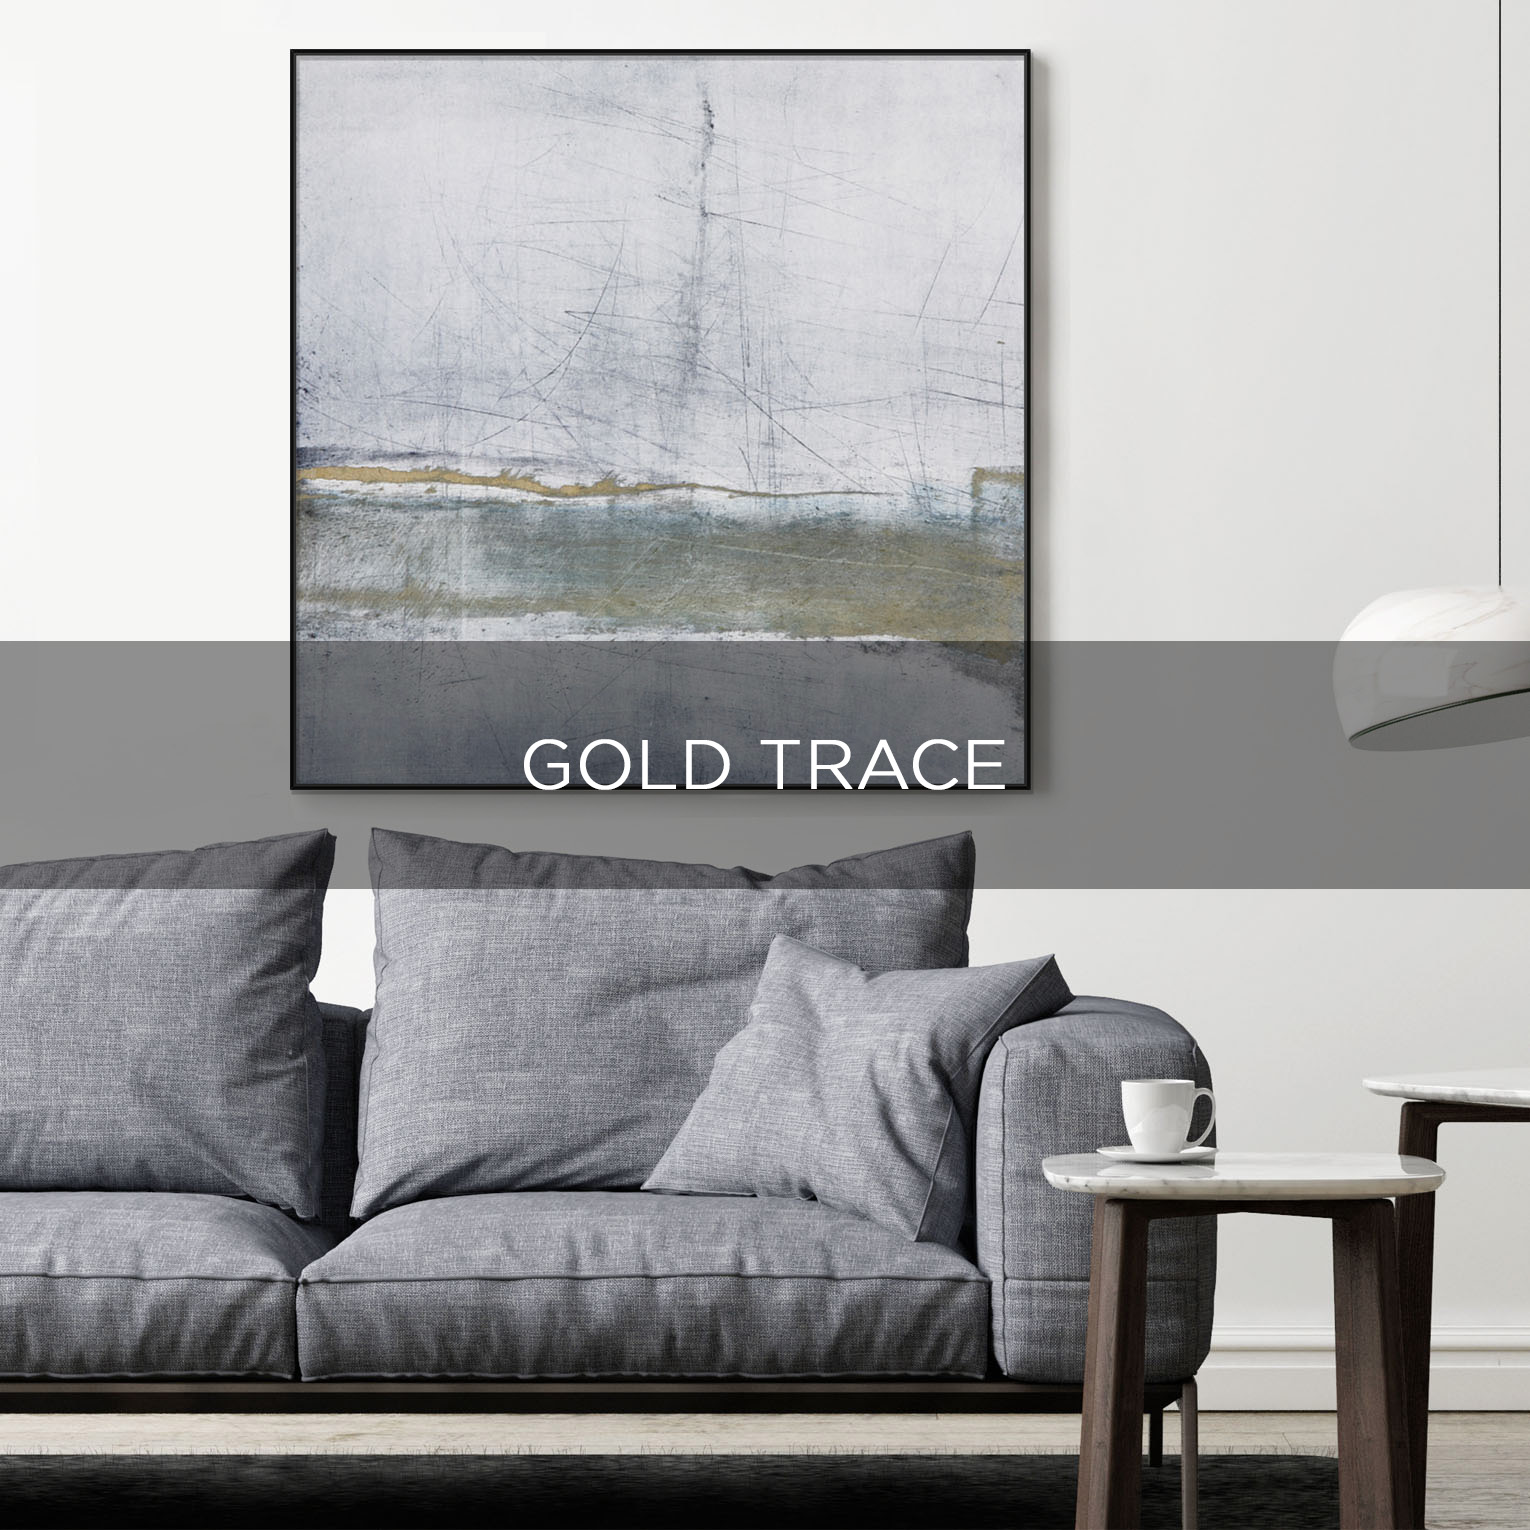 GOLD TRACE